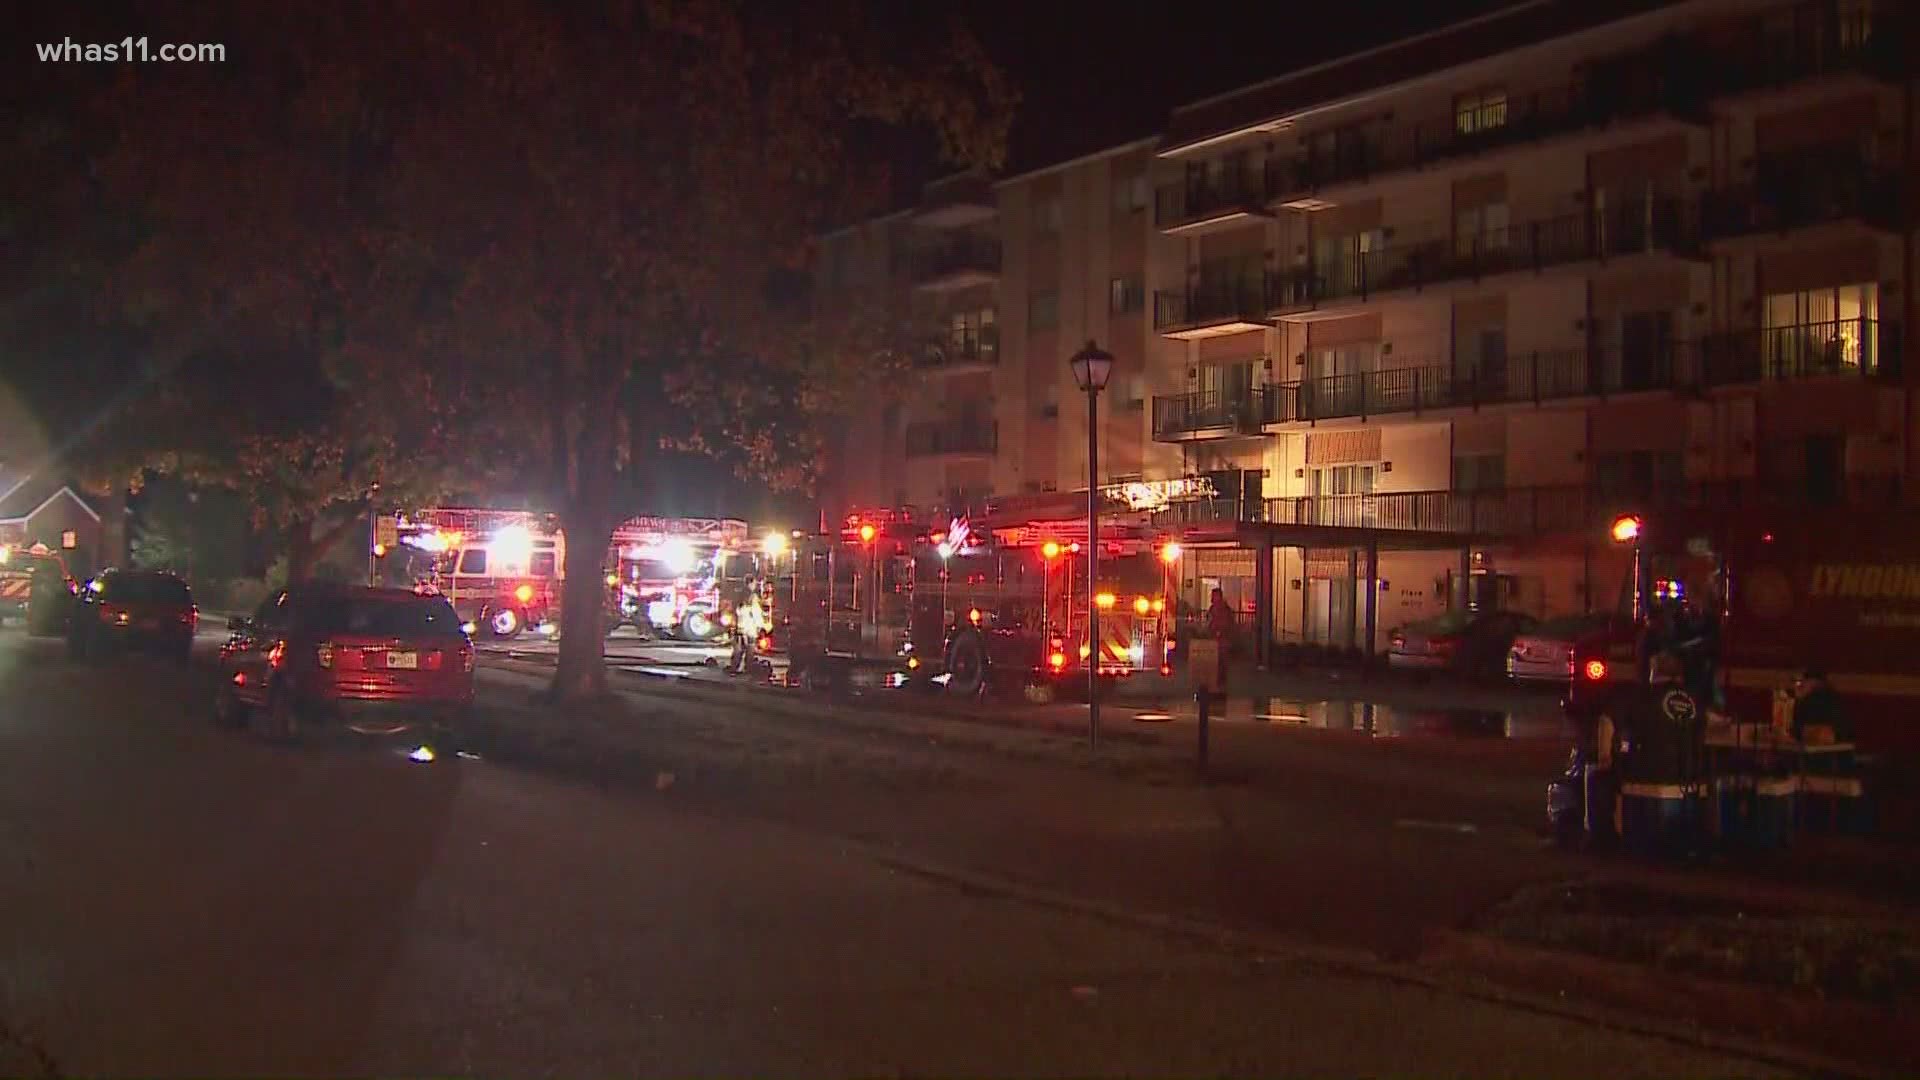 More than 50 people evacuated after condo fire in St. Matthews | 0